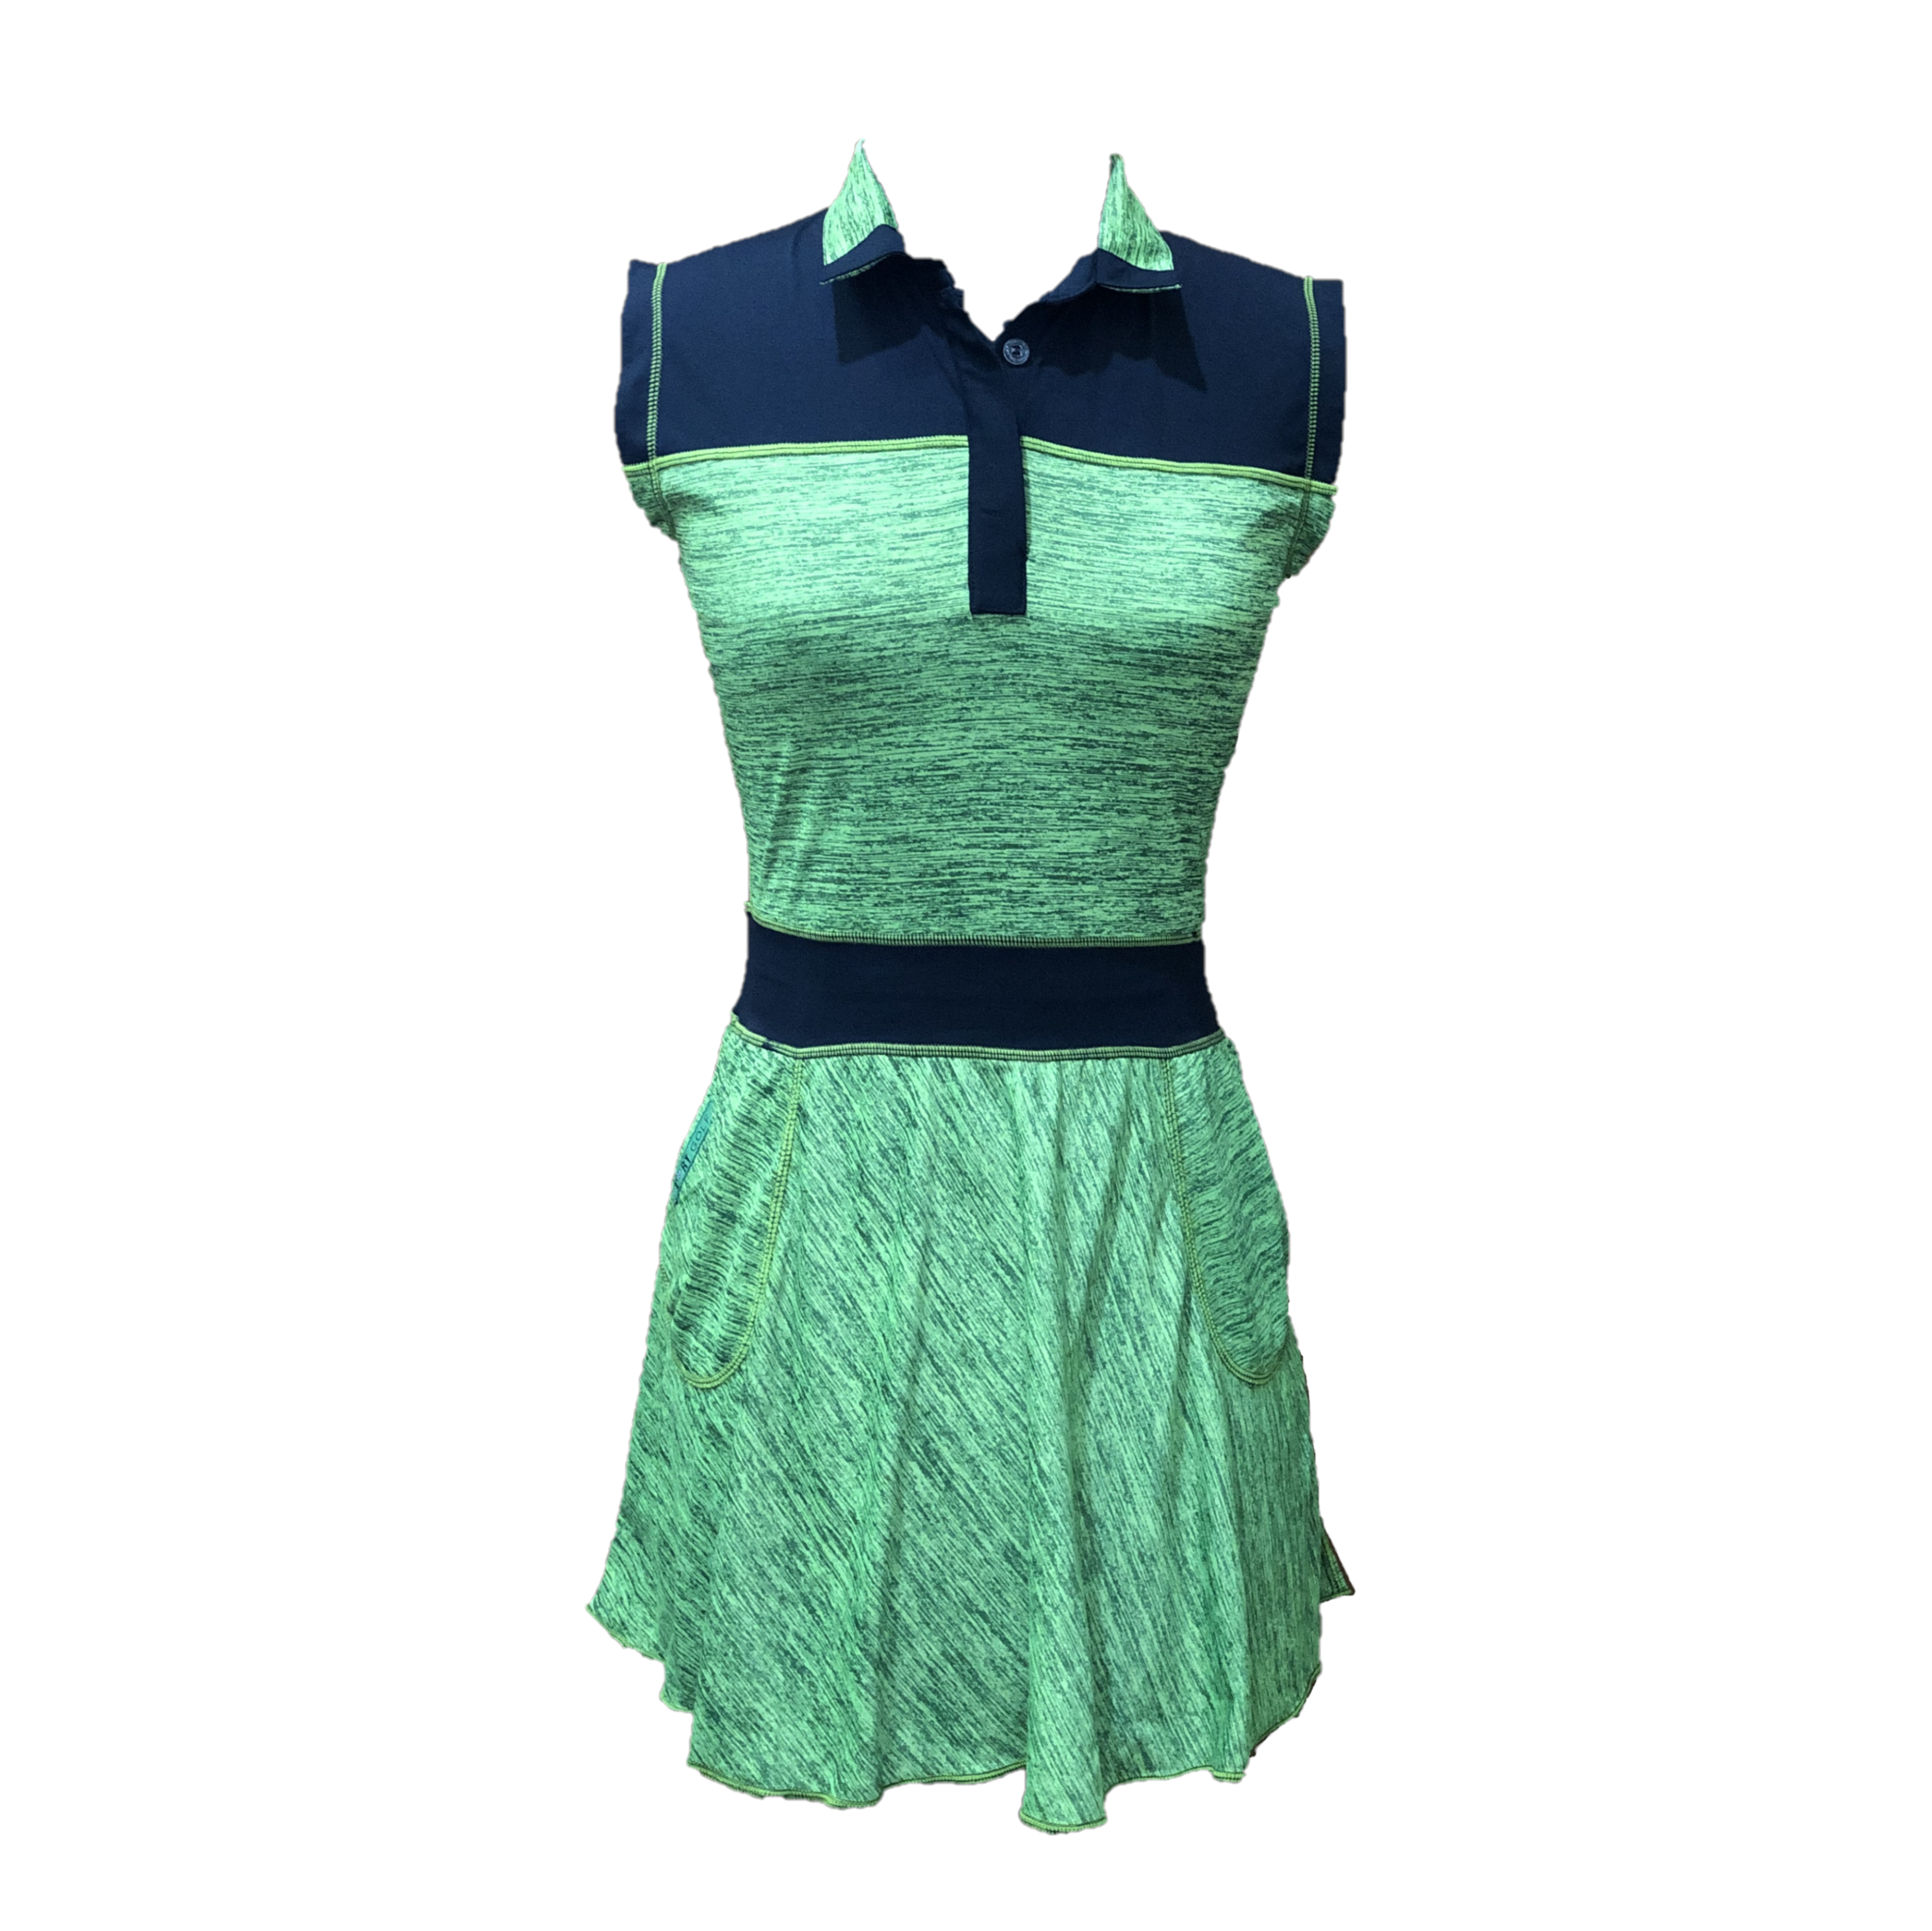 GD-013A || Golf Dress Sleeveless Green with Black Shoulder Panel and Green Collar Neck Trim